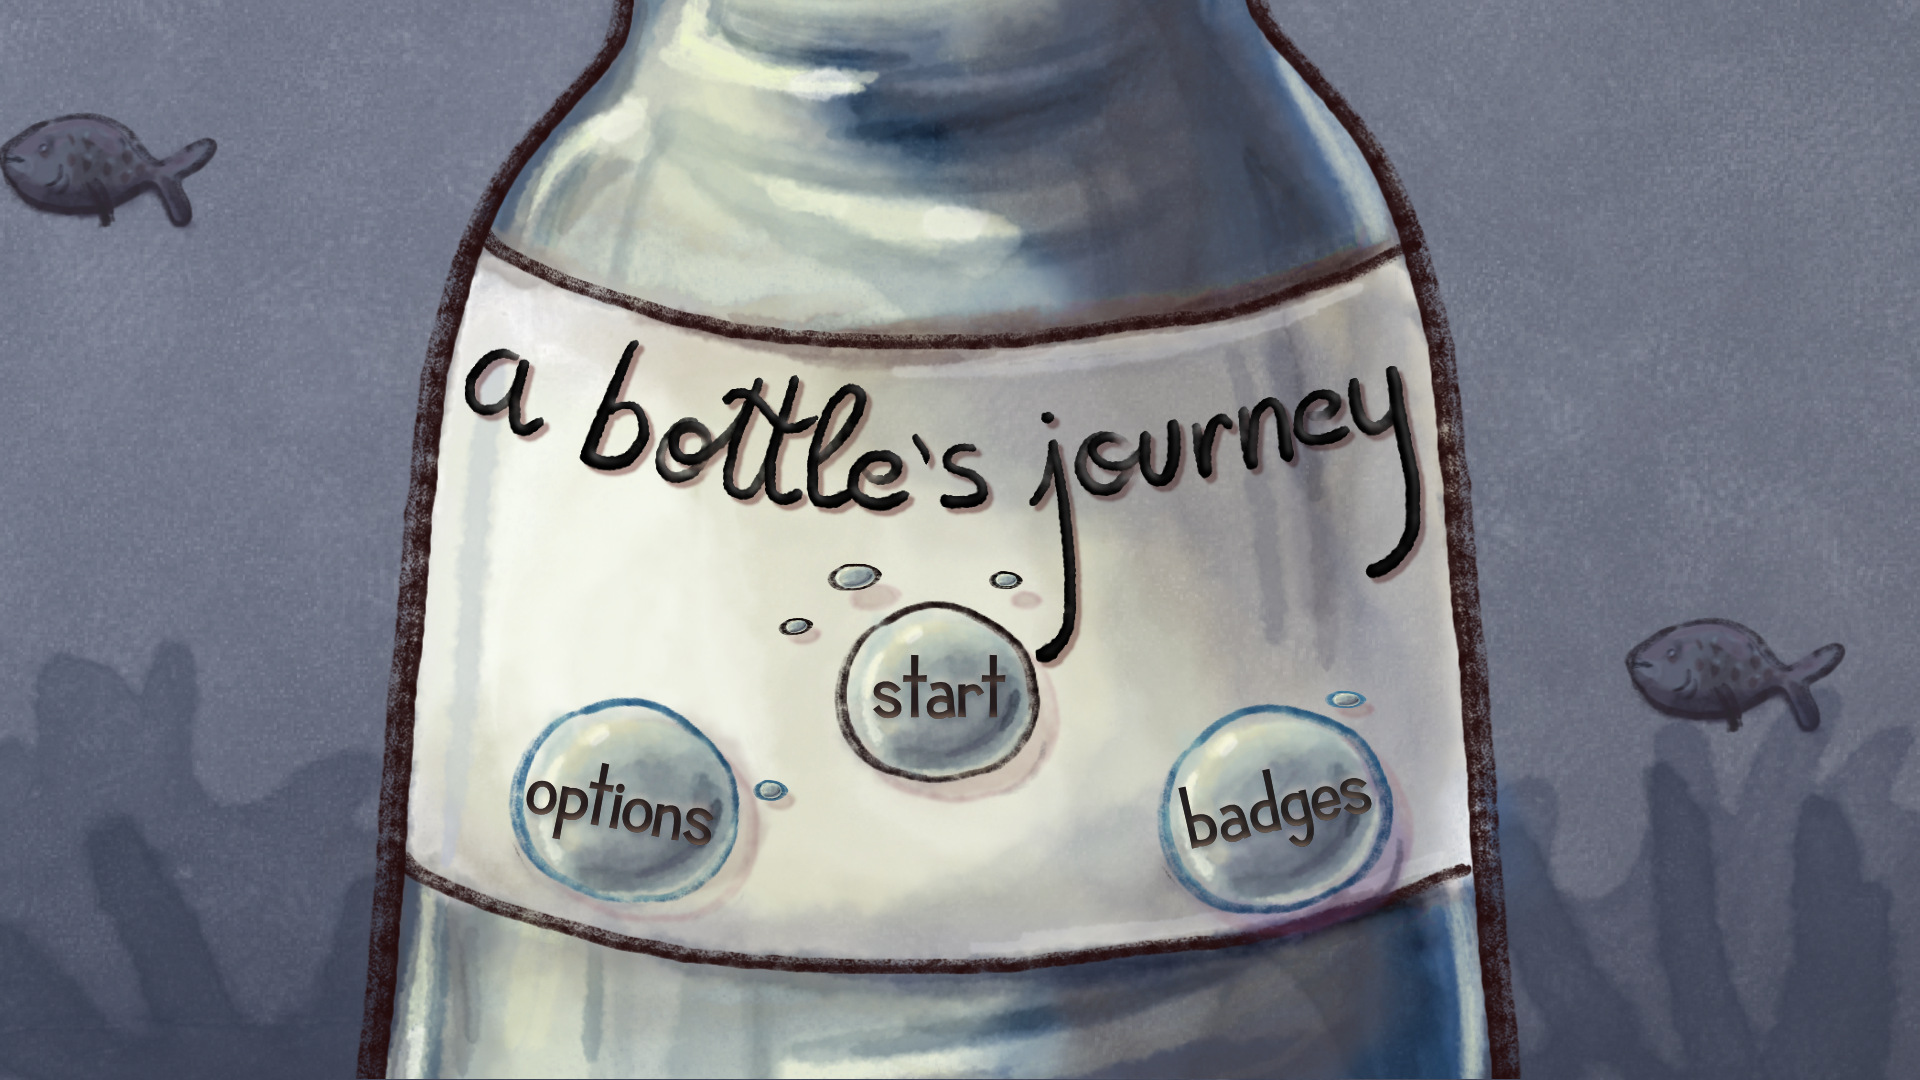 A Bottle Journey cover image